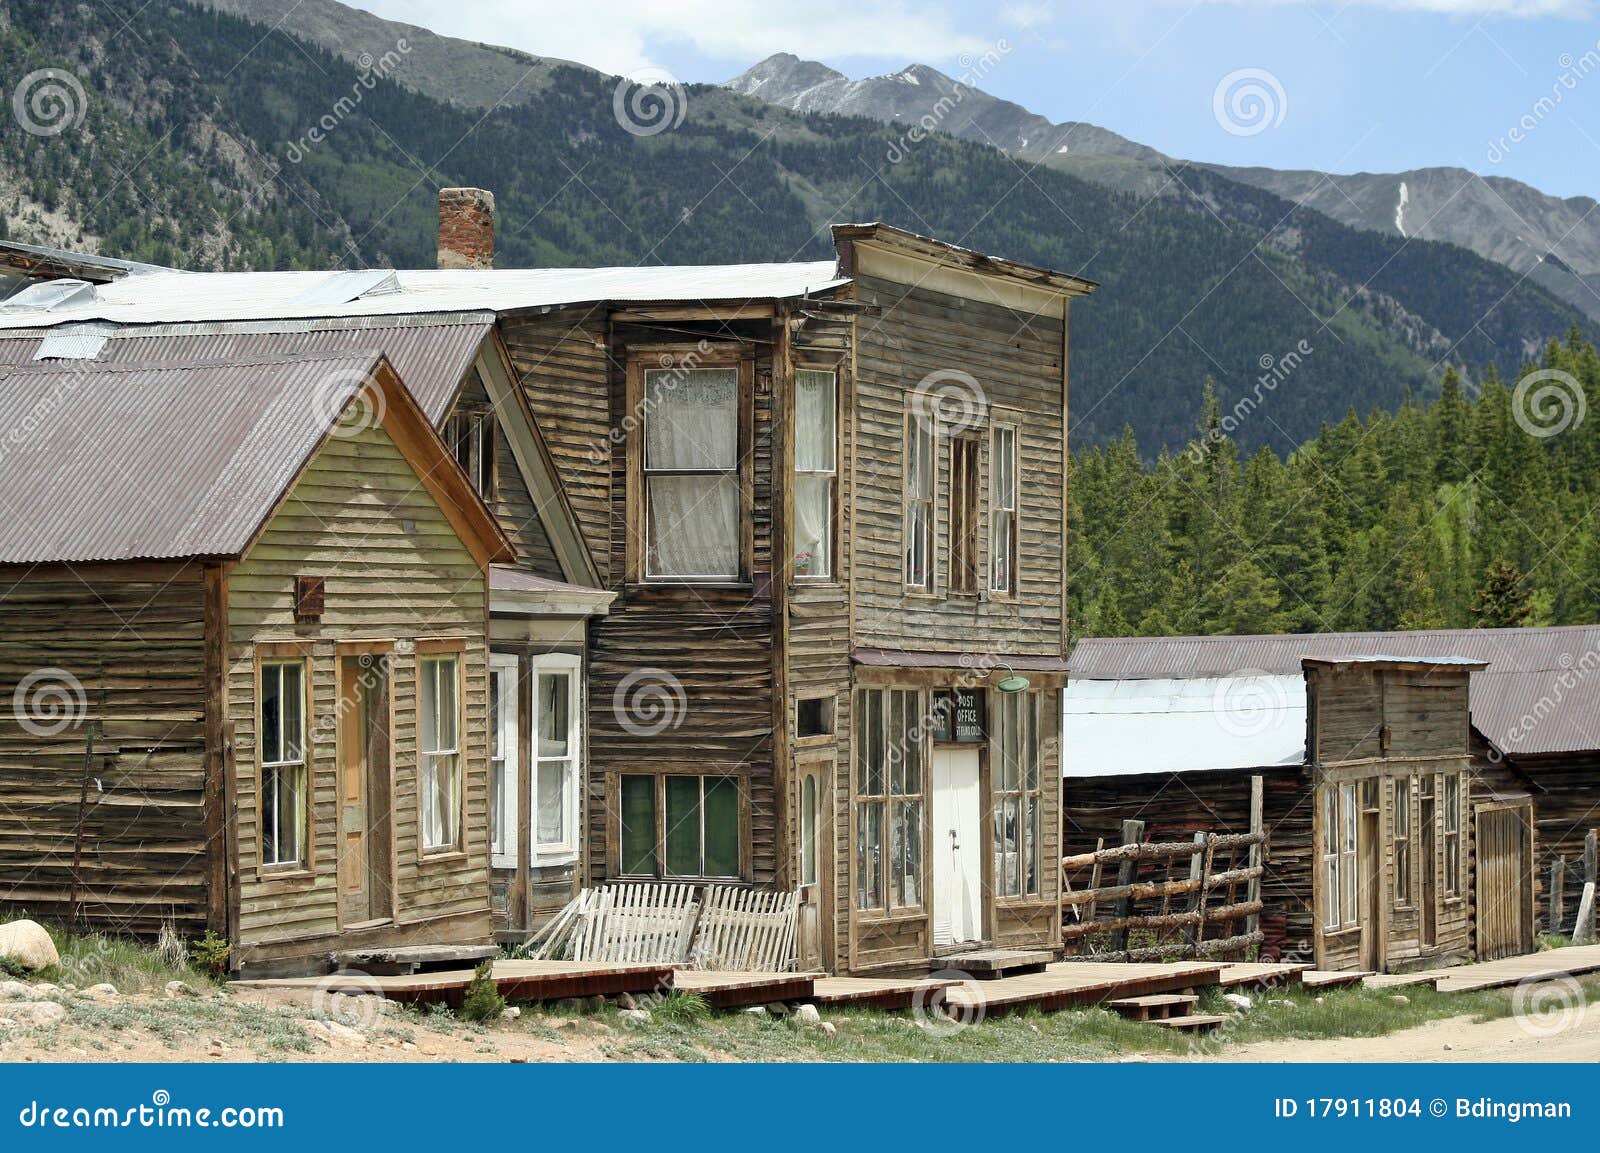 old west ghost town